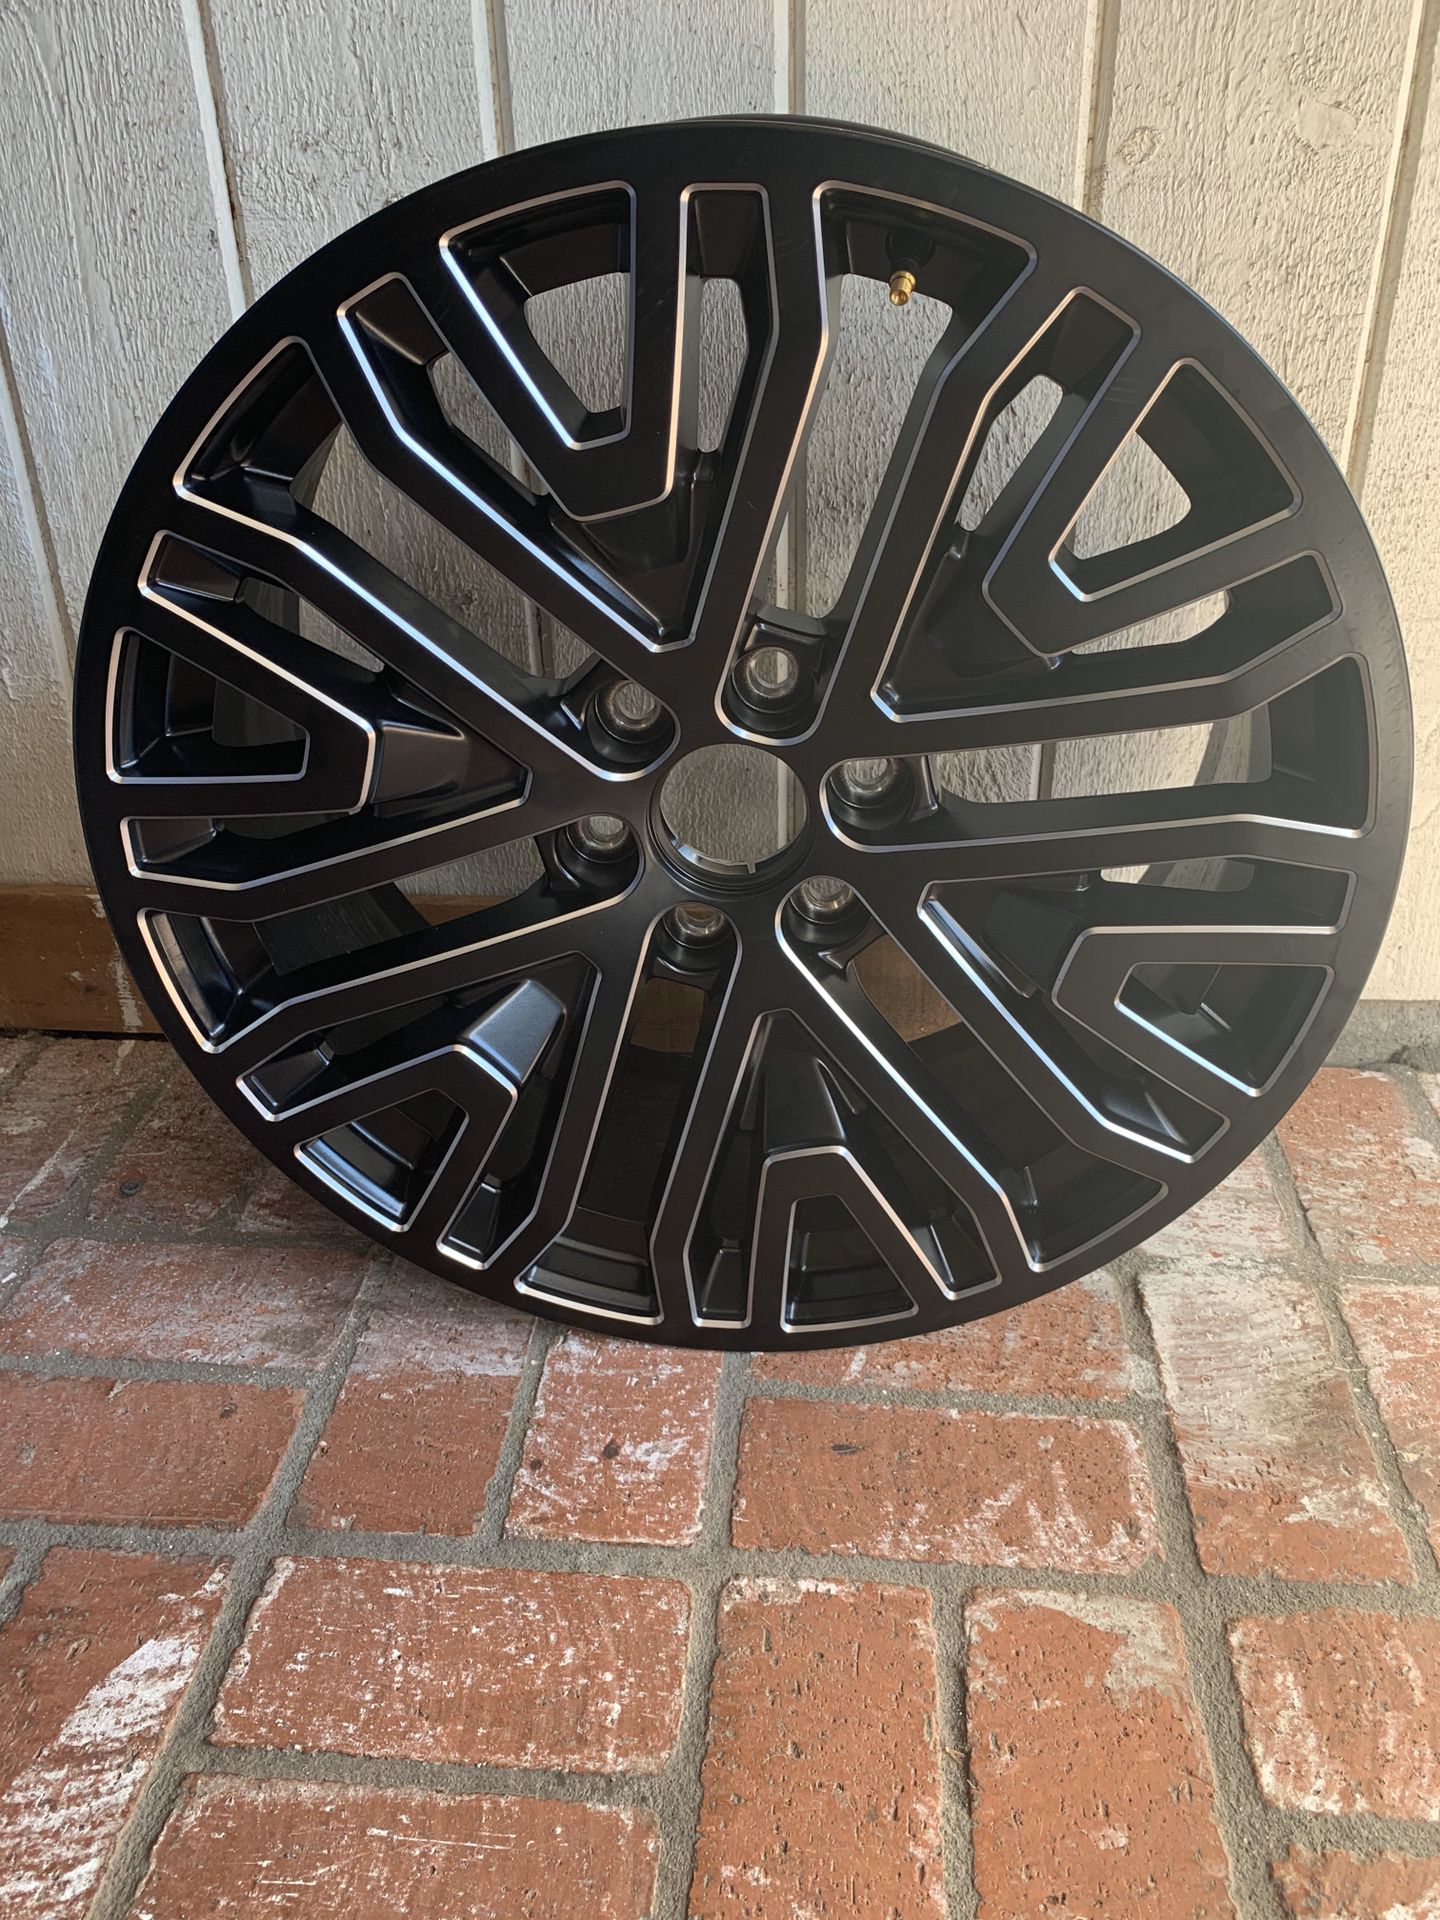 22’ Brand New Rims - Never Been Used. Set of four six lug nuts.